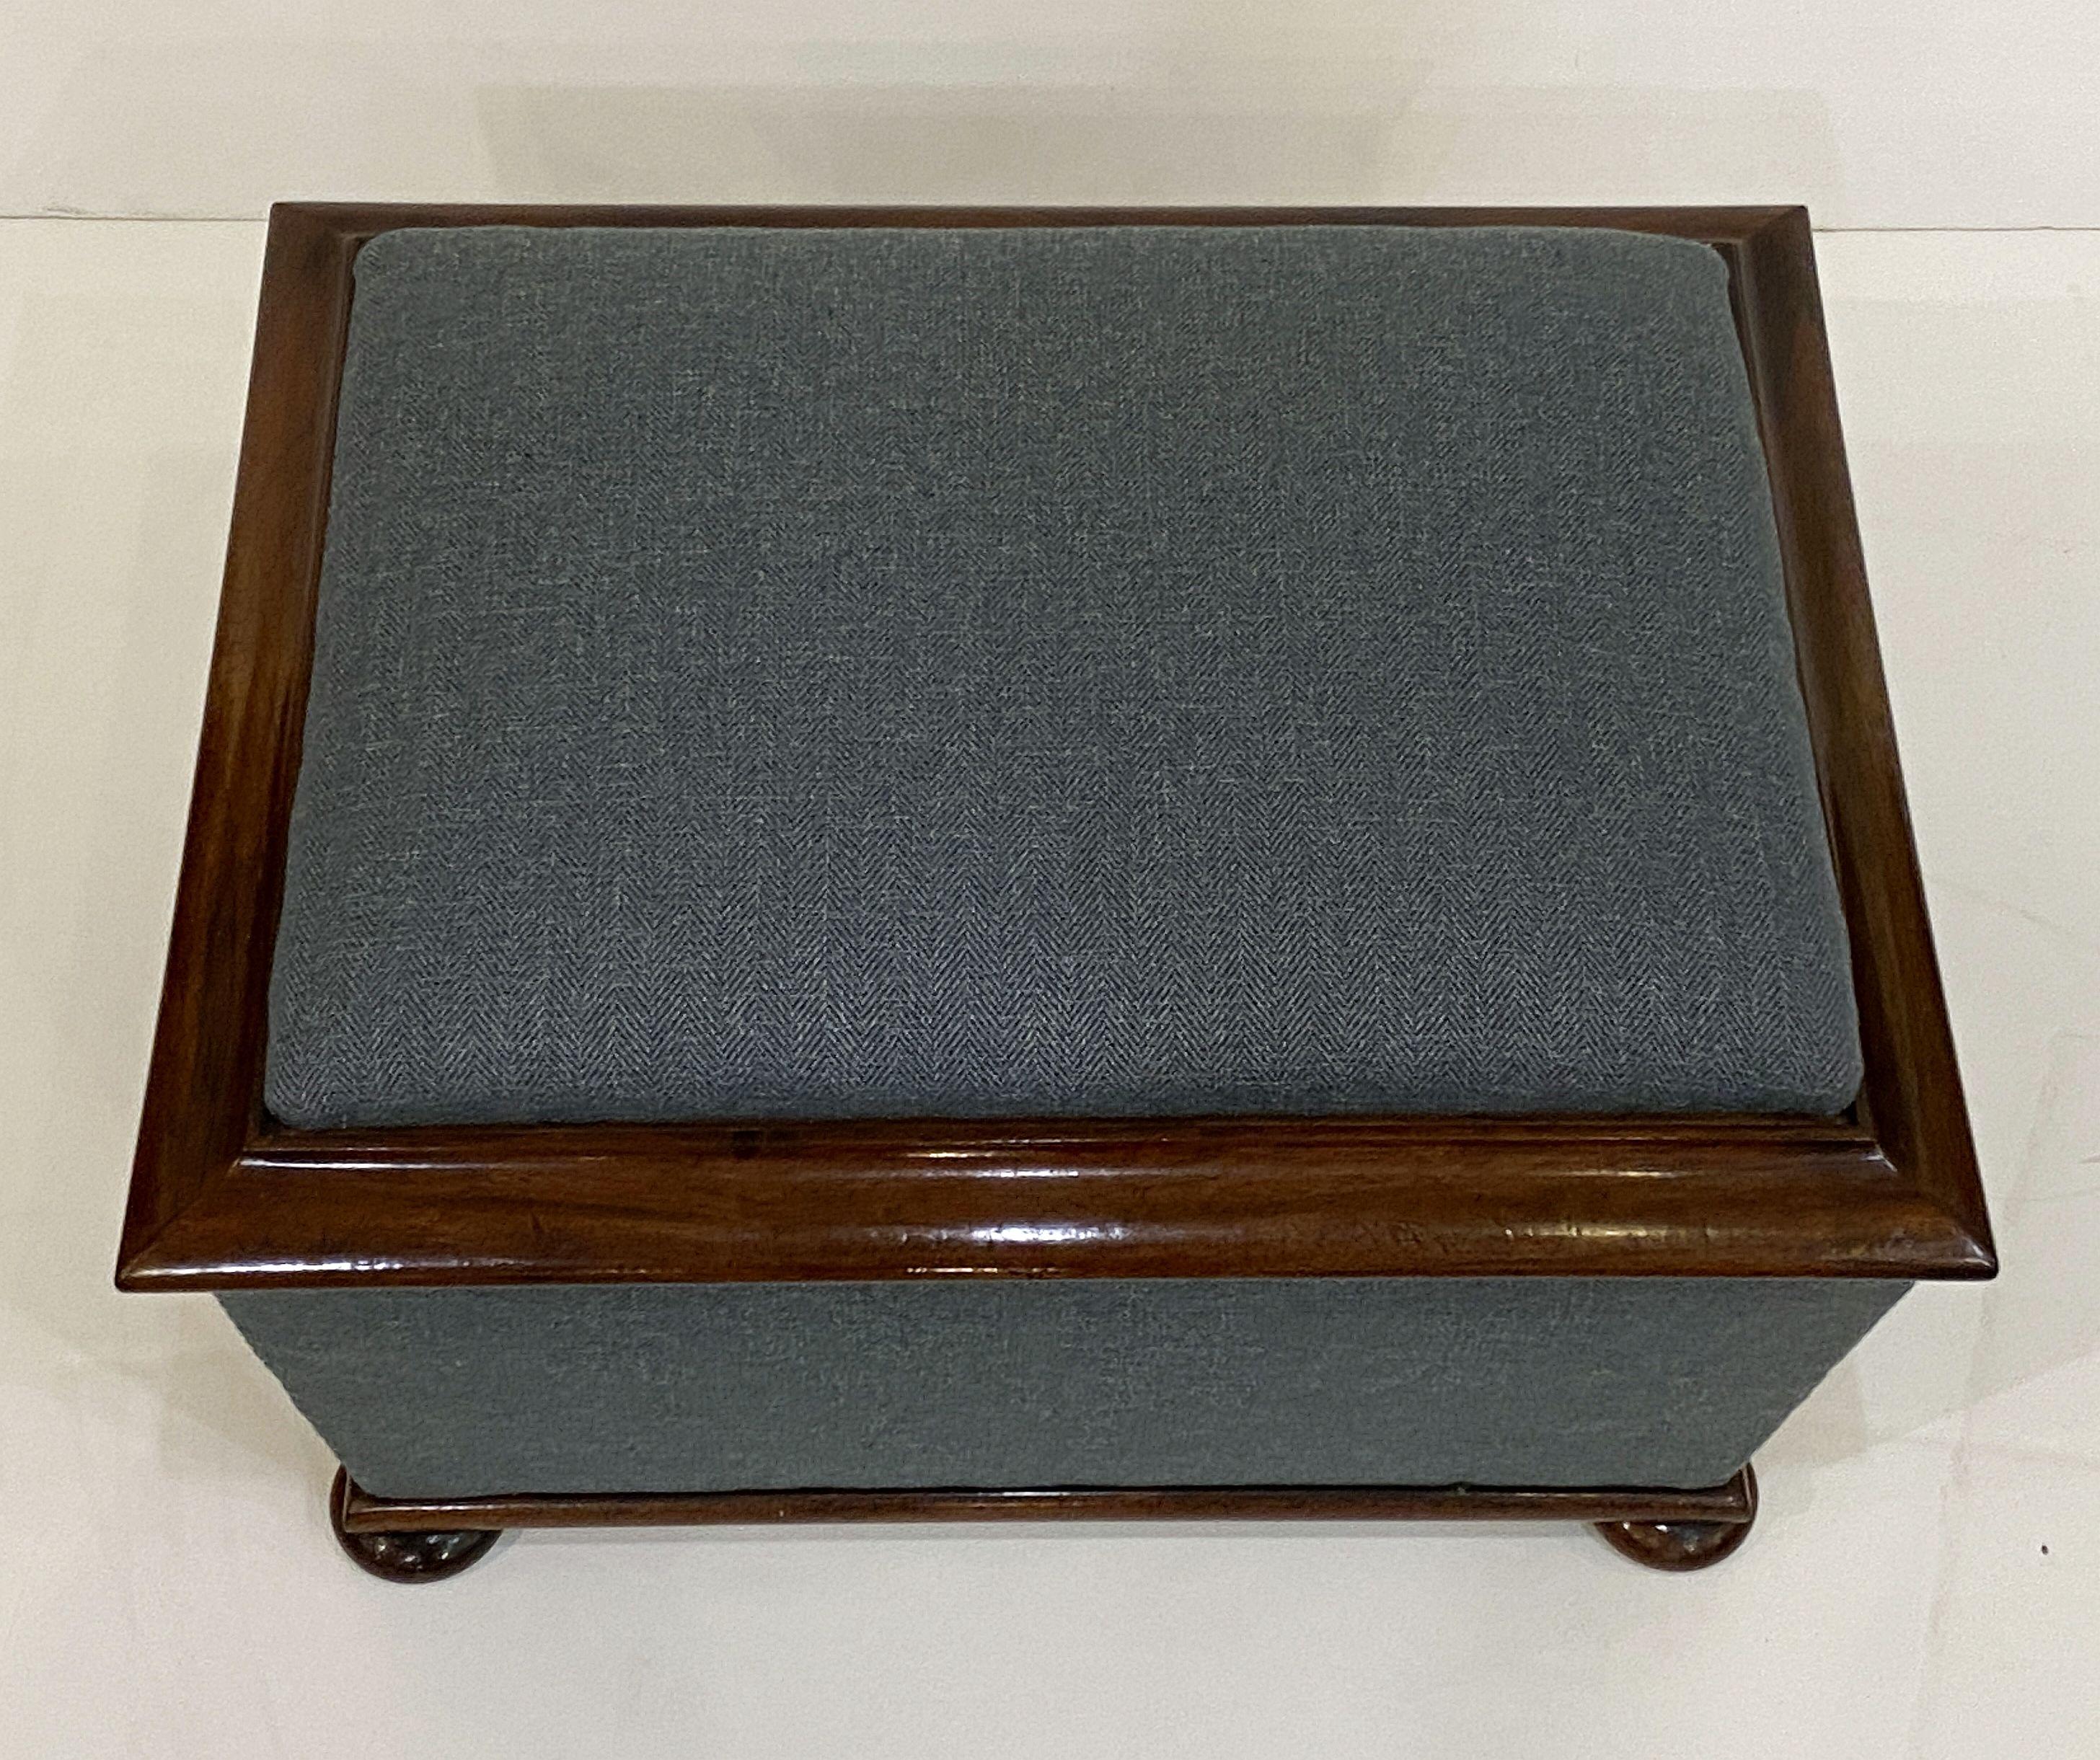 English Upholstered Trunk or Pouffe Ottoman Seat 1